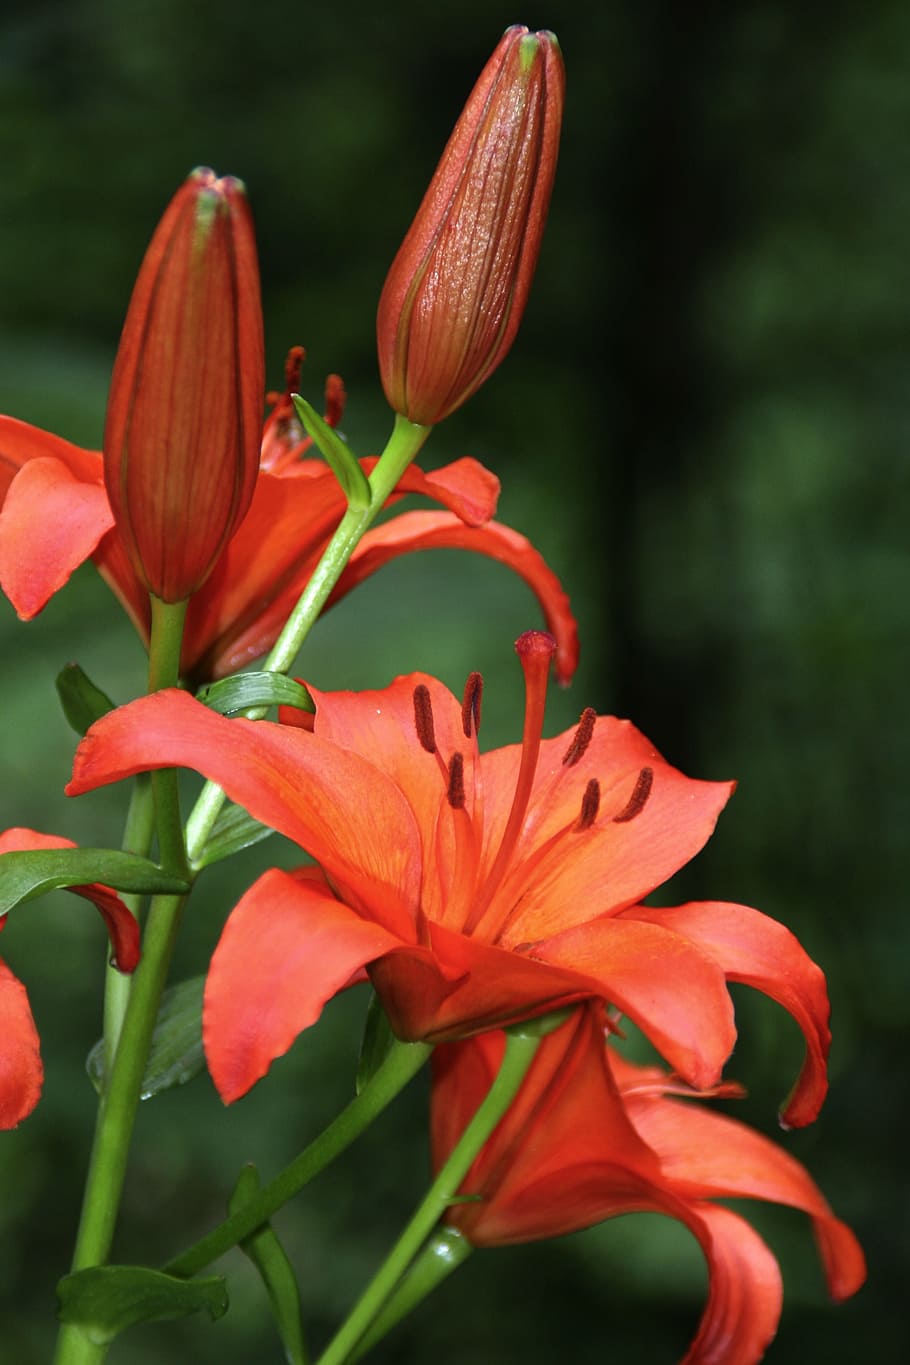 lily, red, blossom, bloom, nature, flowers, garden, summer, blossomed, plant